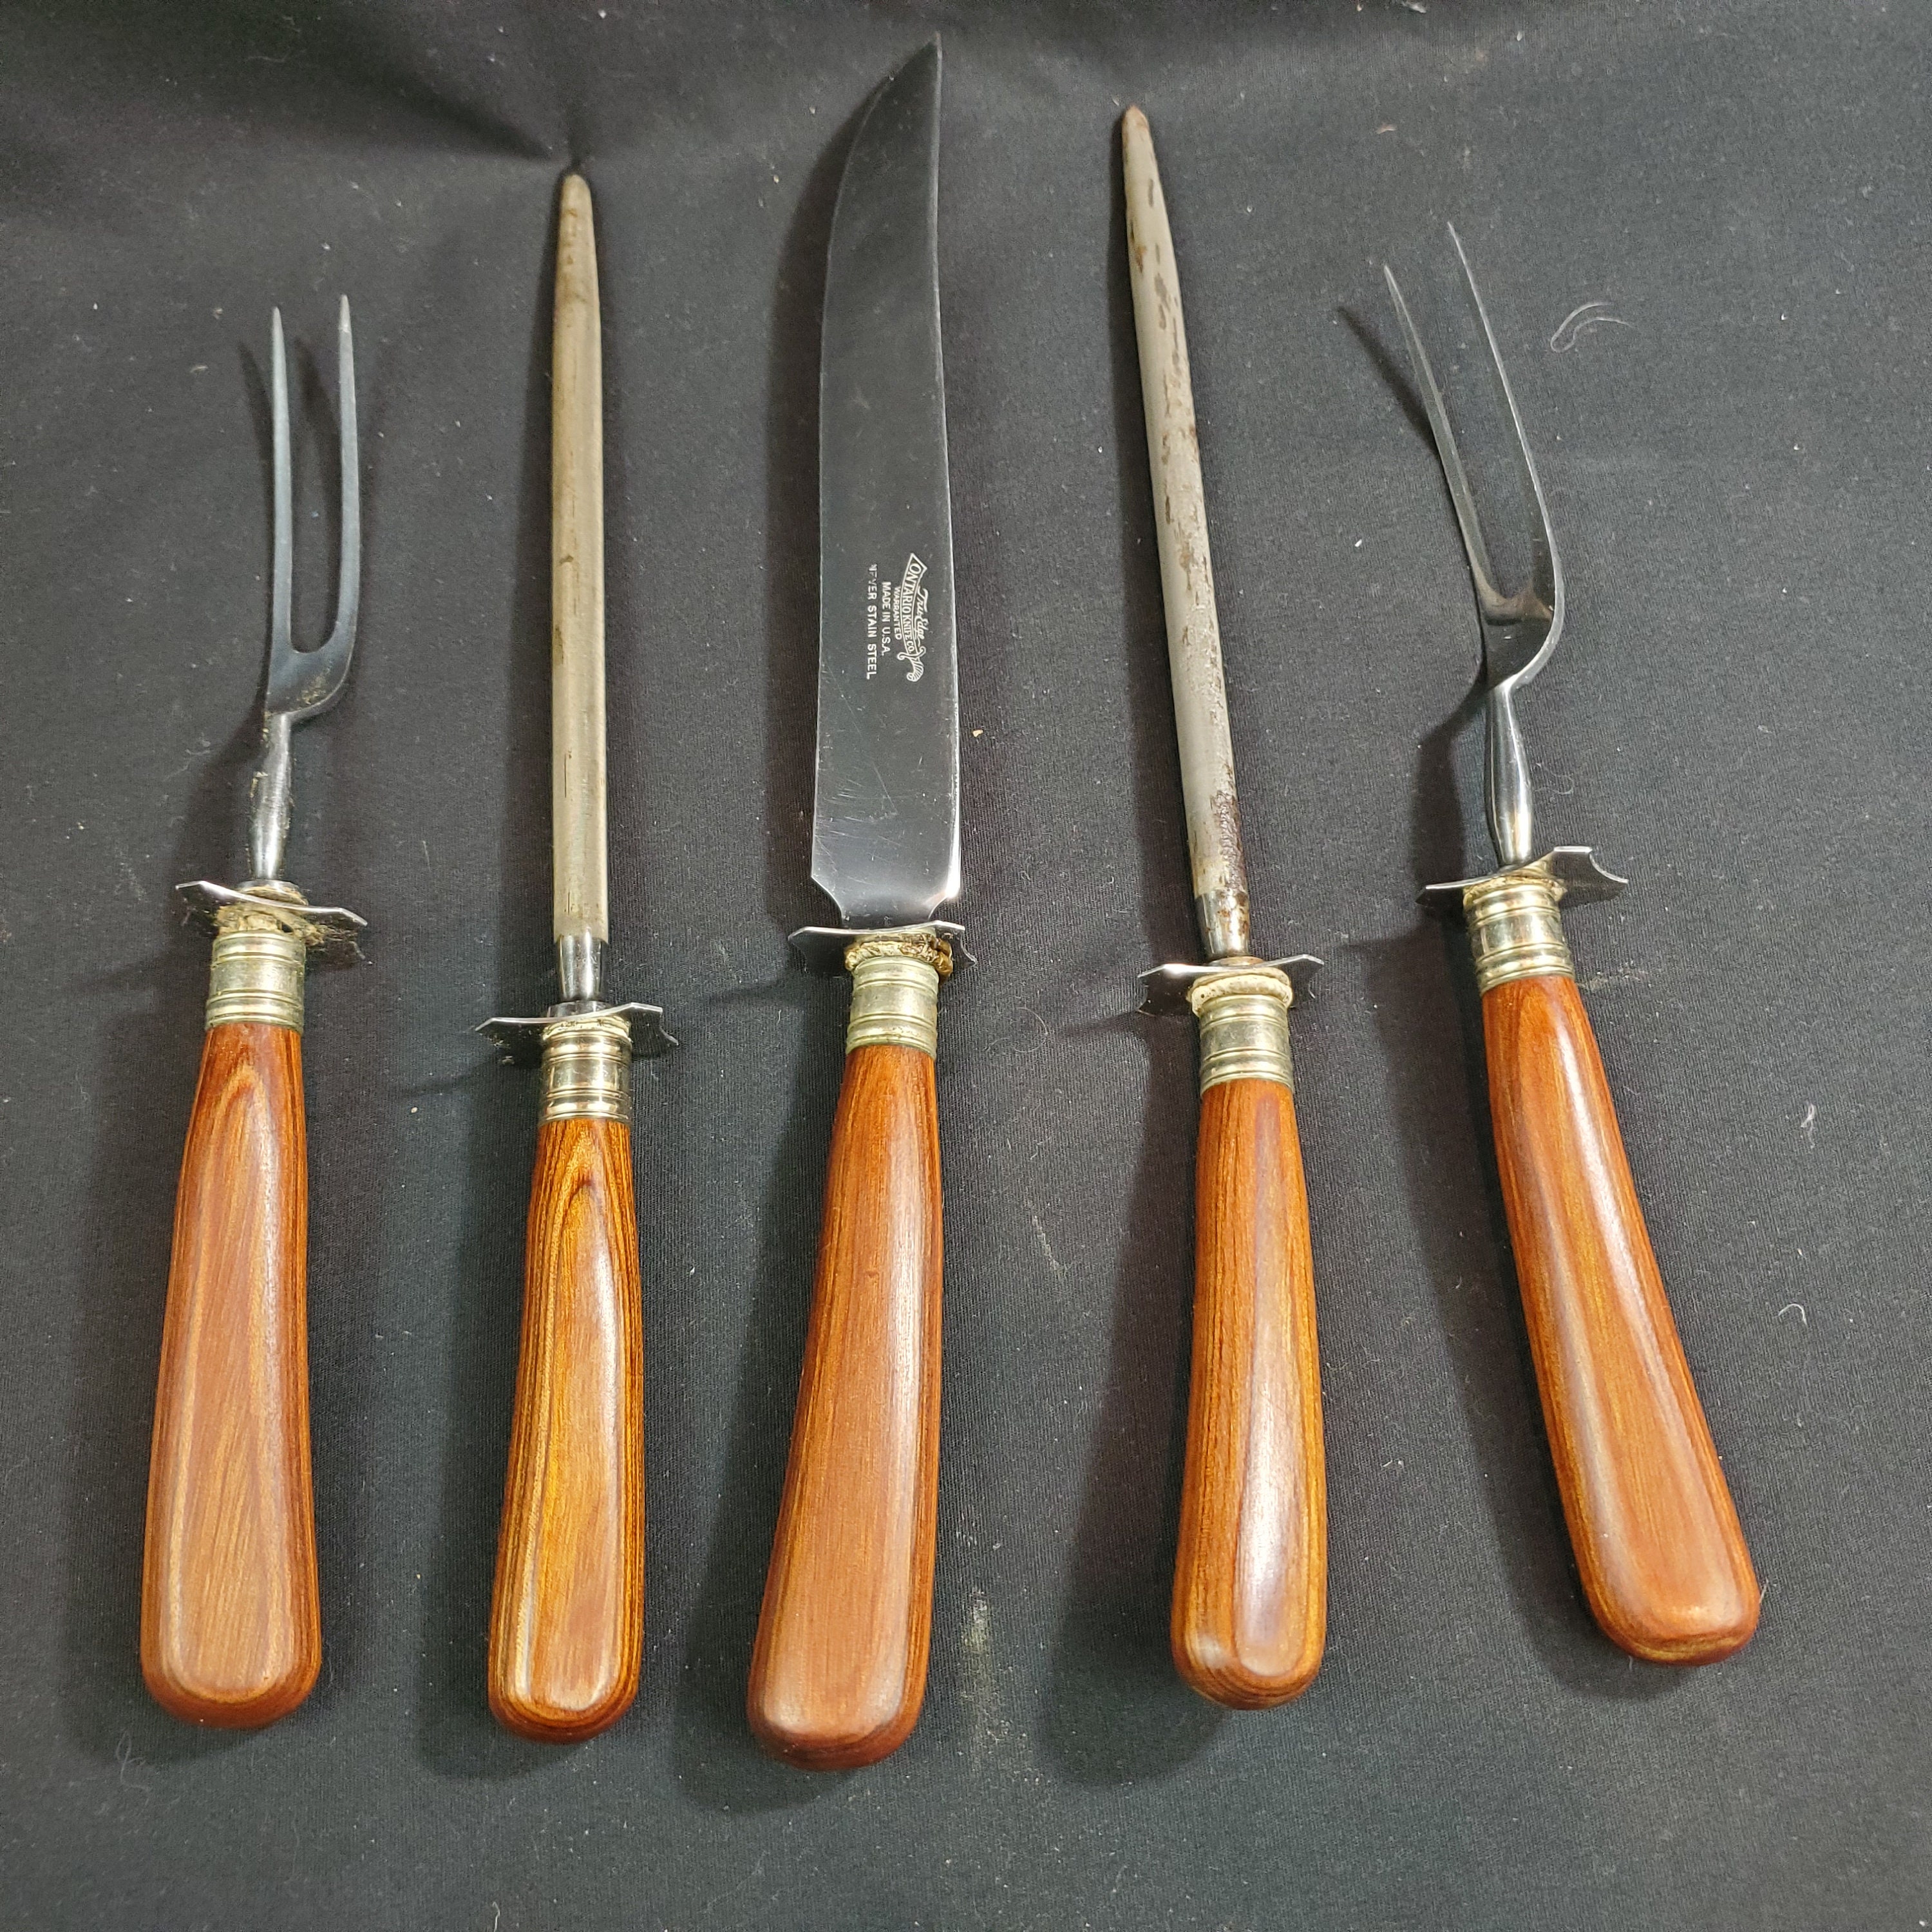 VINTAGE Old Hickory Knife Set and Hanging Block. Only 3 Knives in This 4  Pc. Set. 